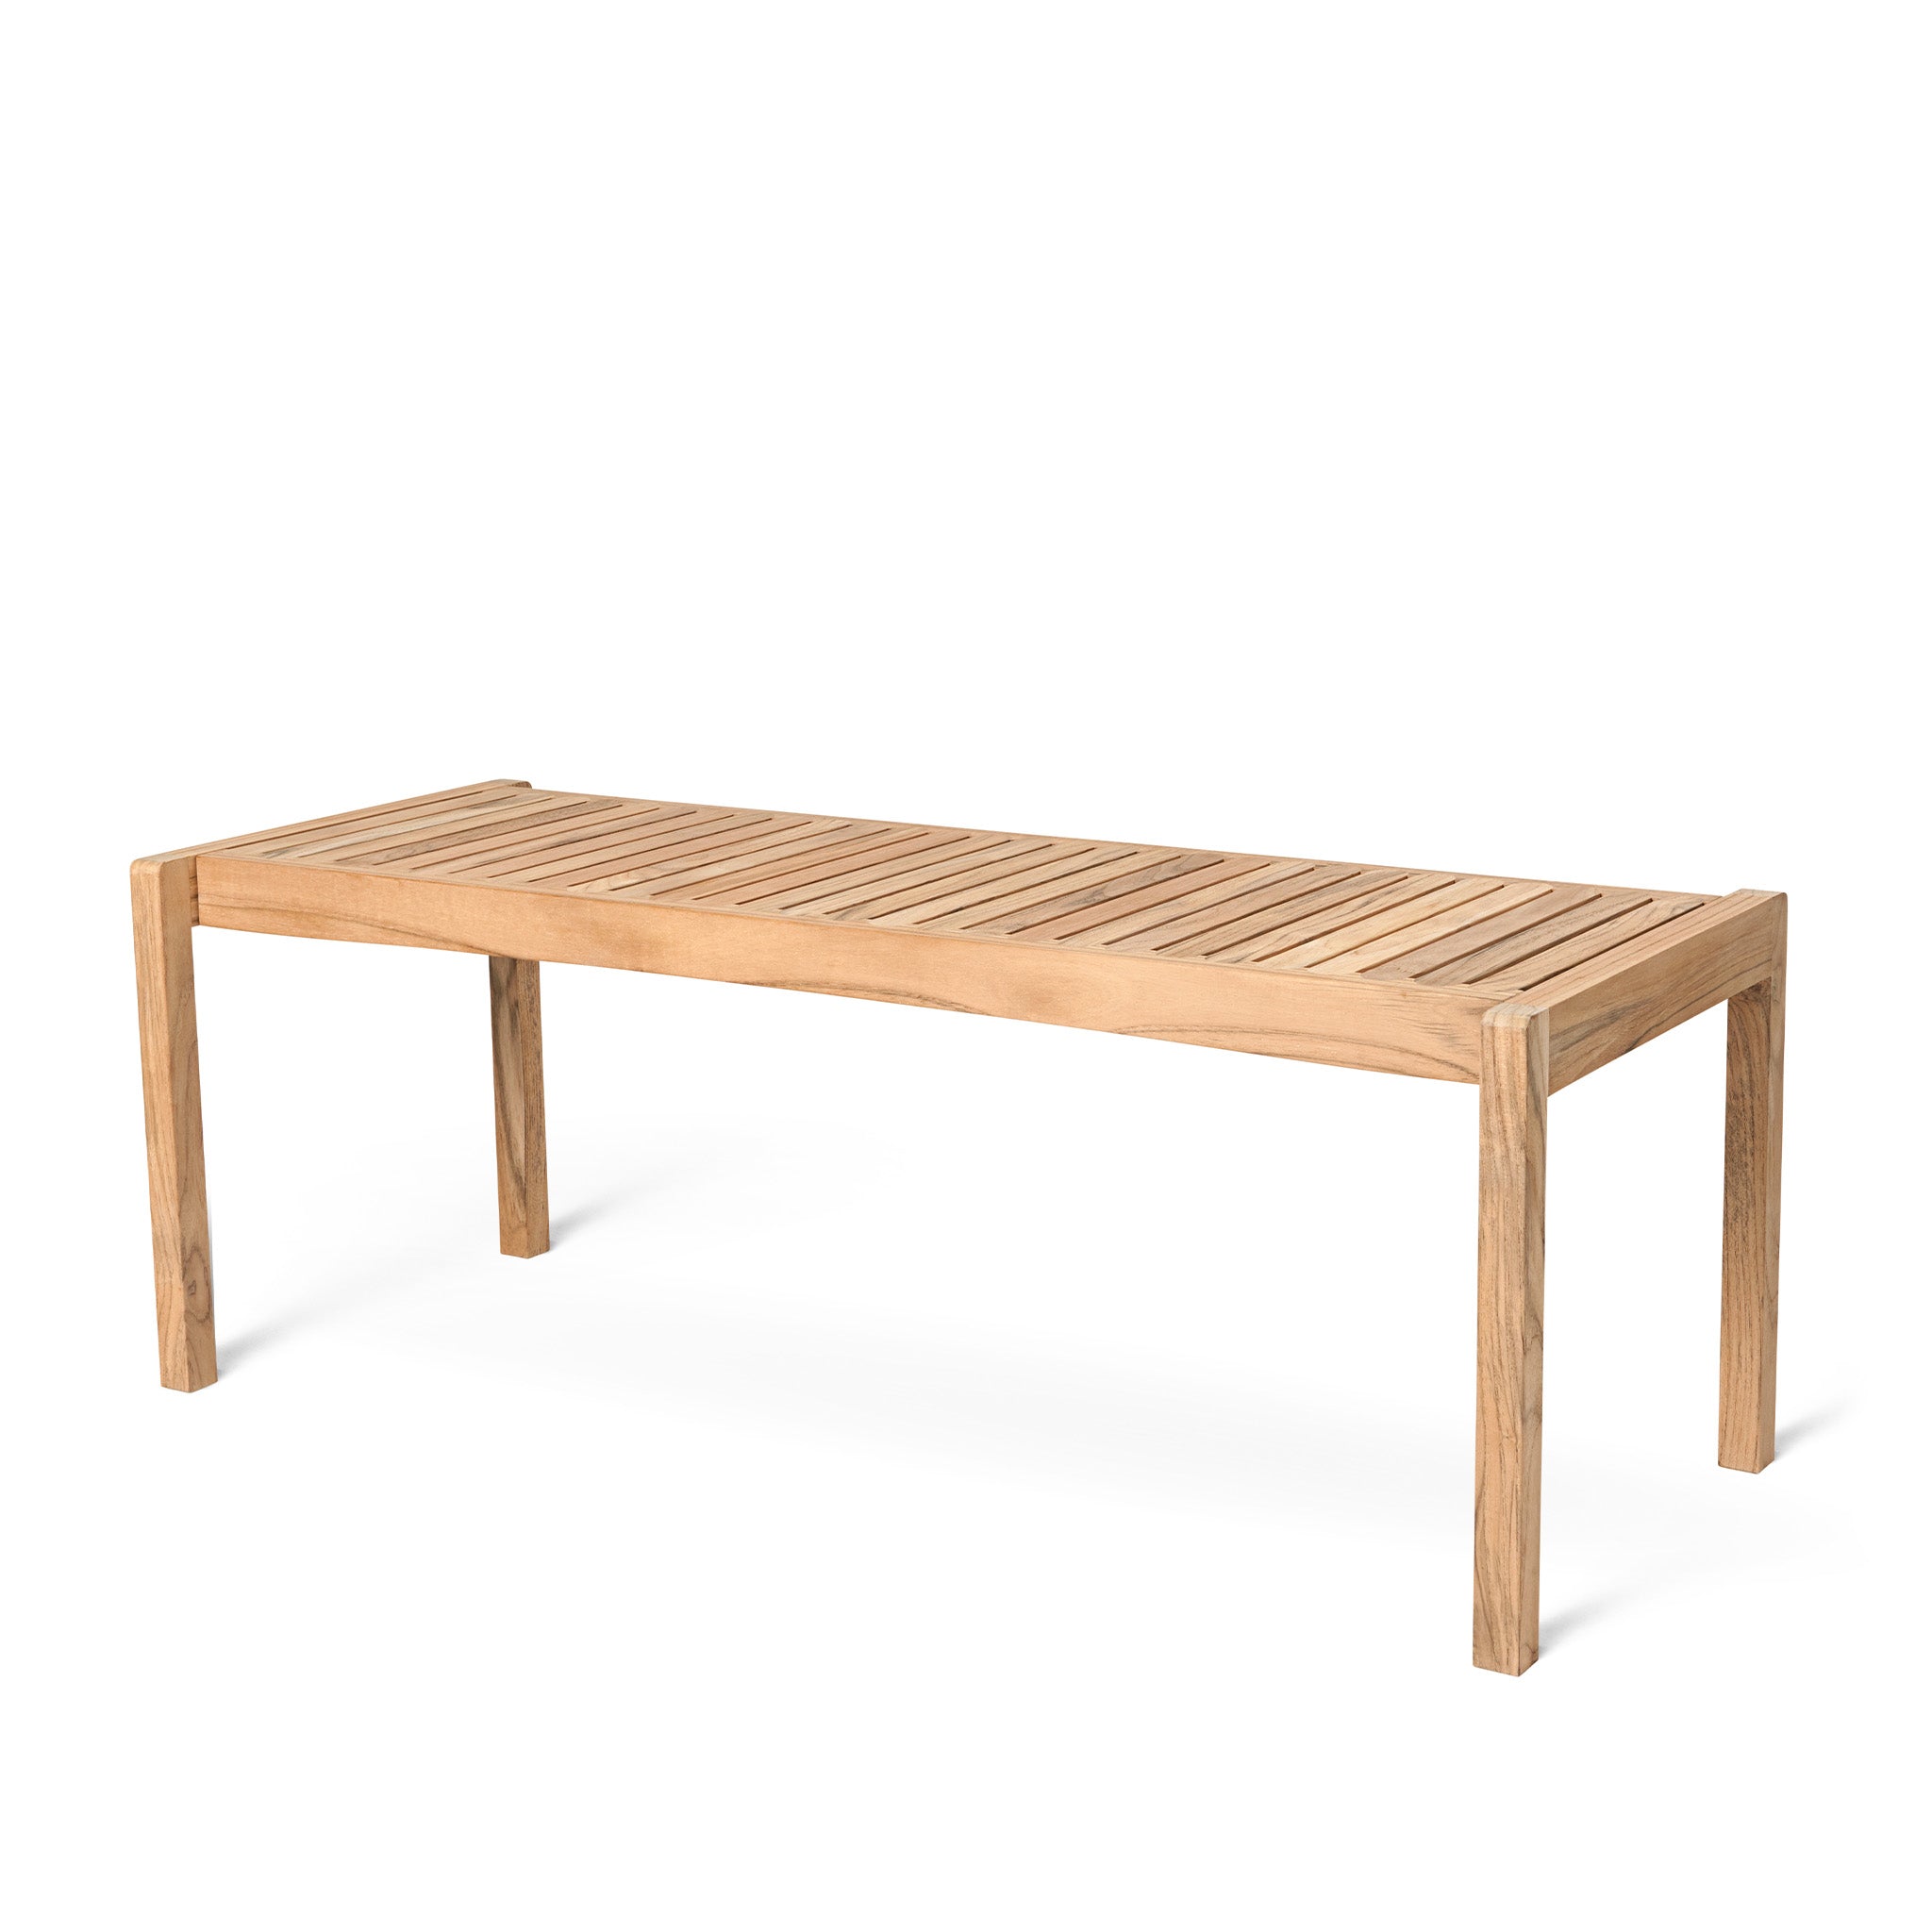 AH912 Low table / Bench by Alfred Homann